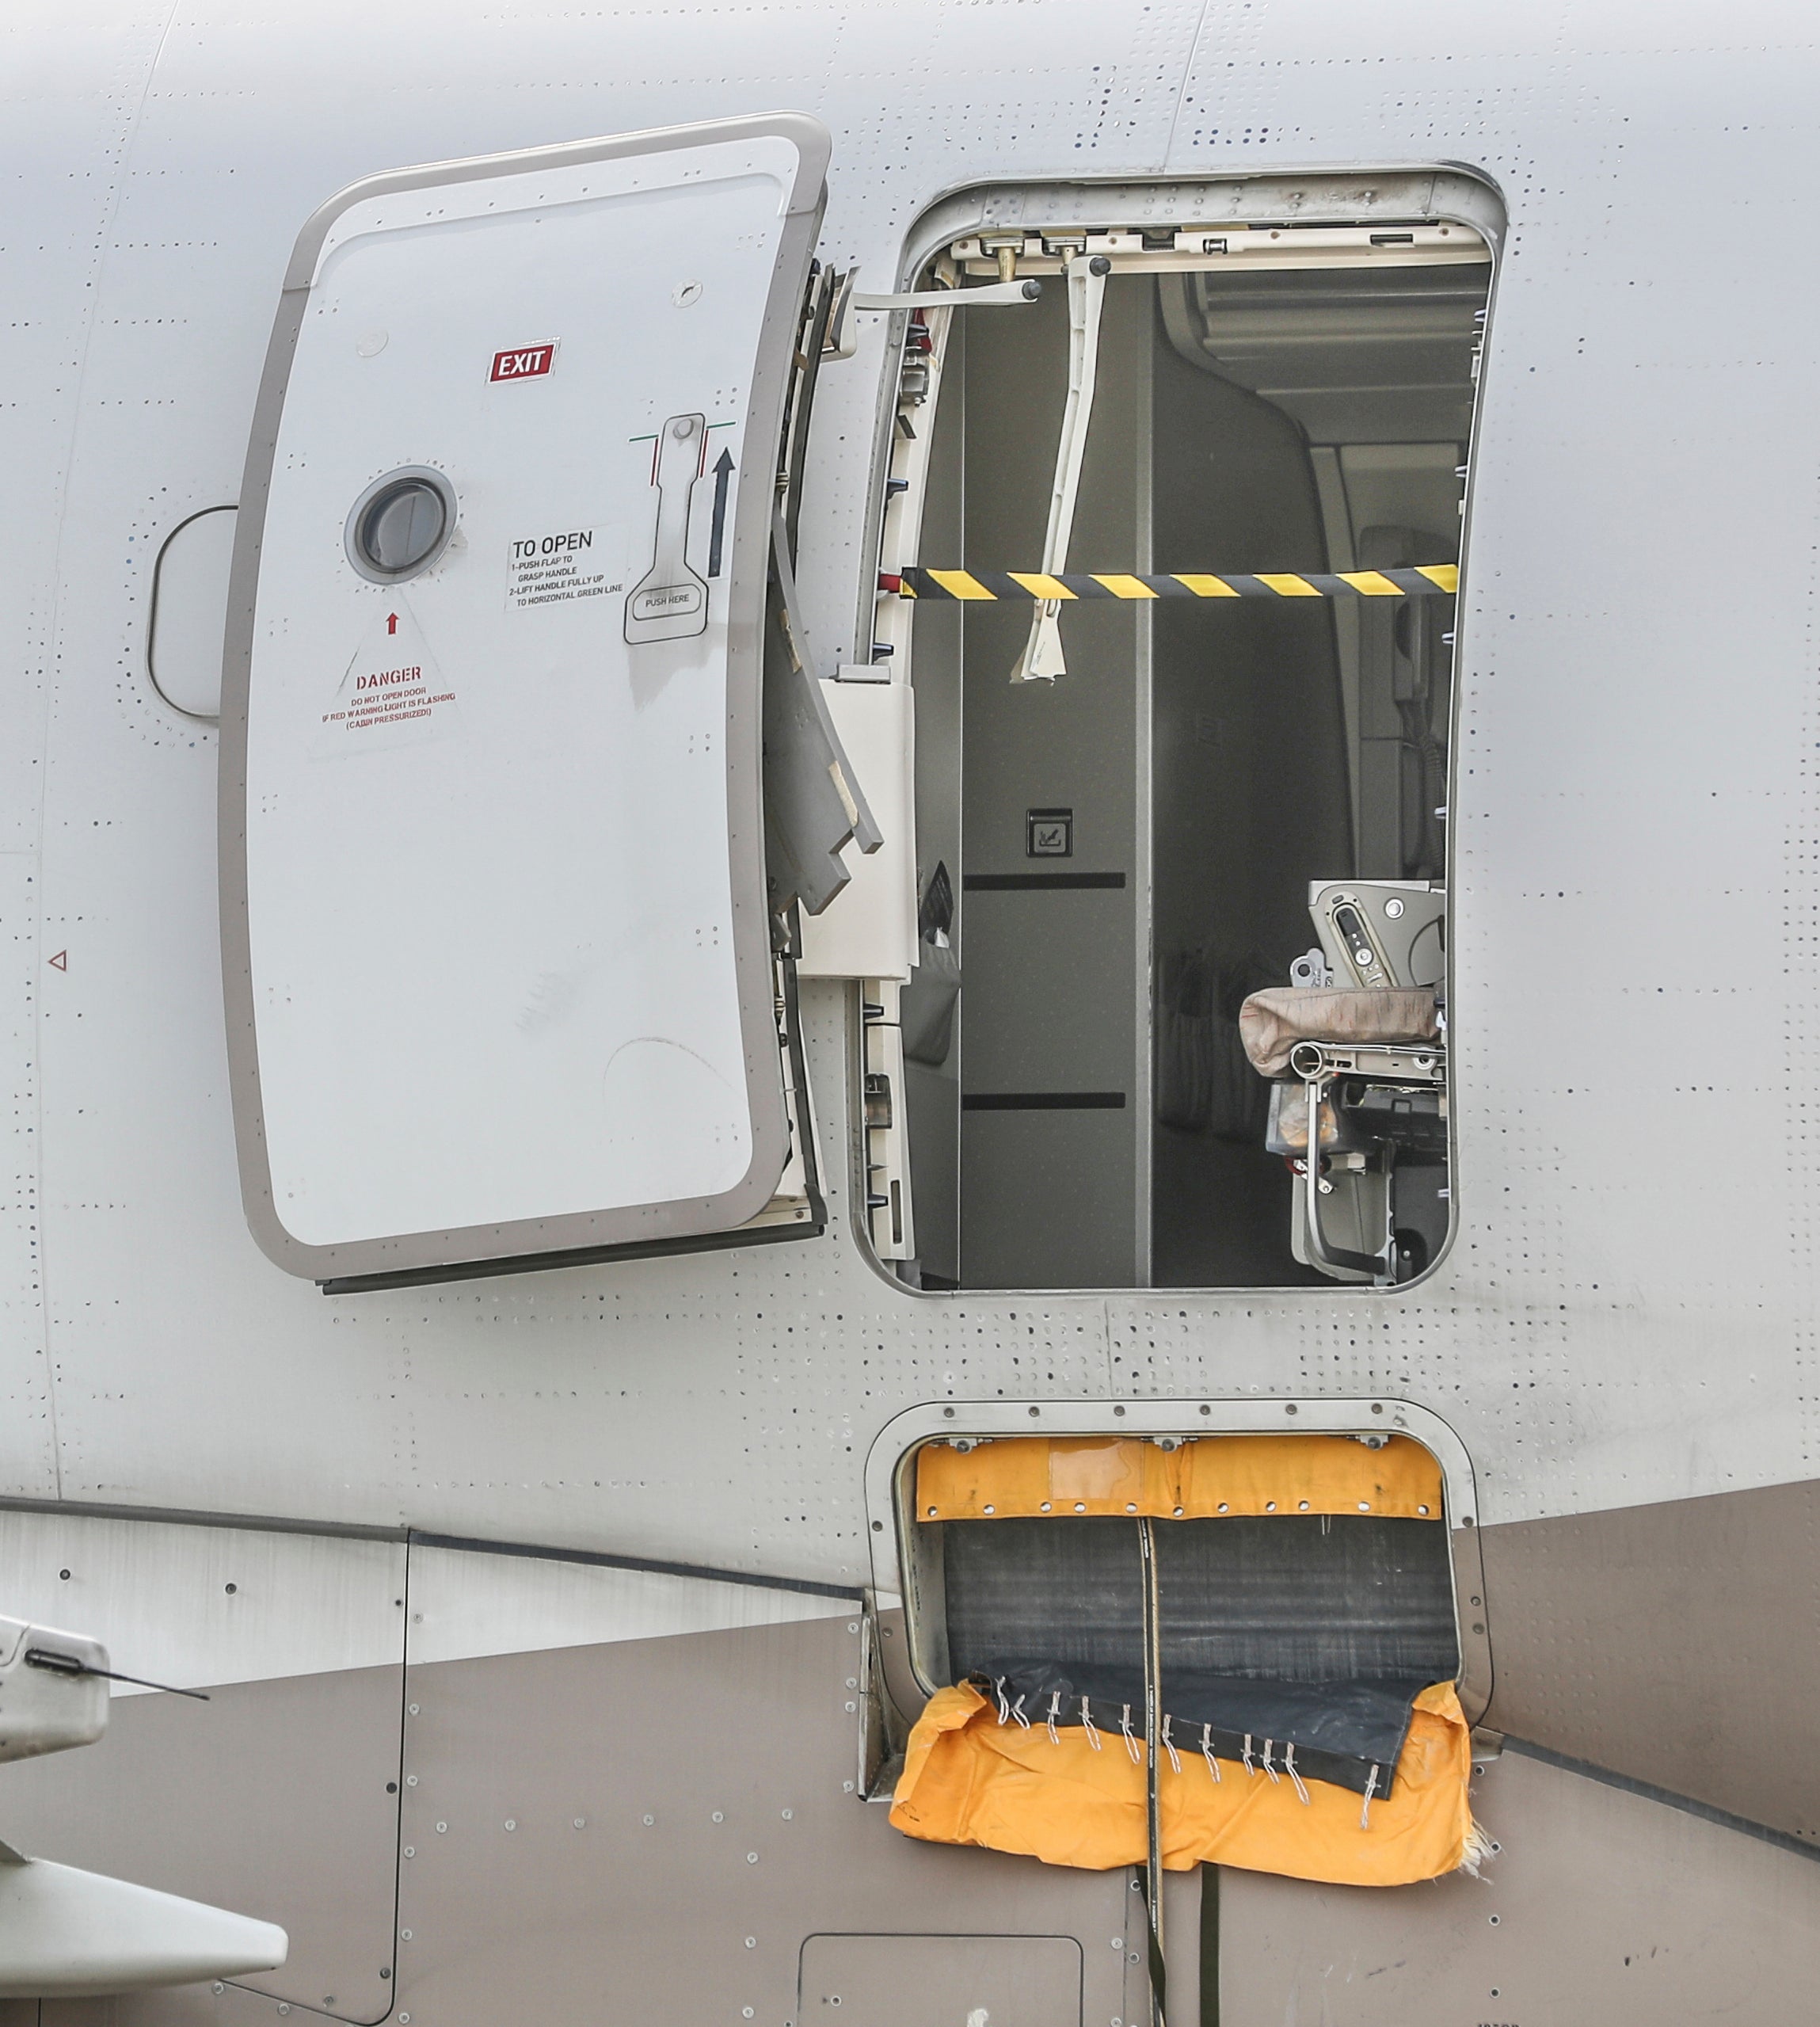 The door of the plane was opened in mid air, 700ft above the ground